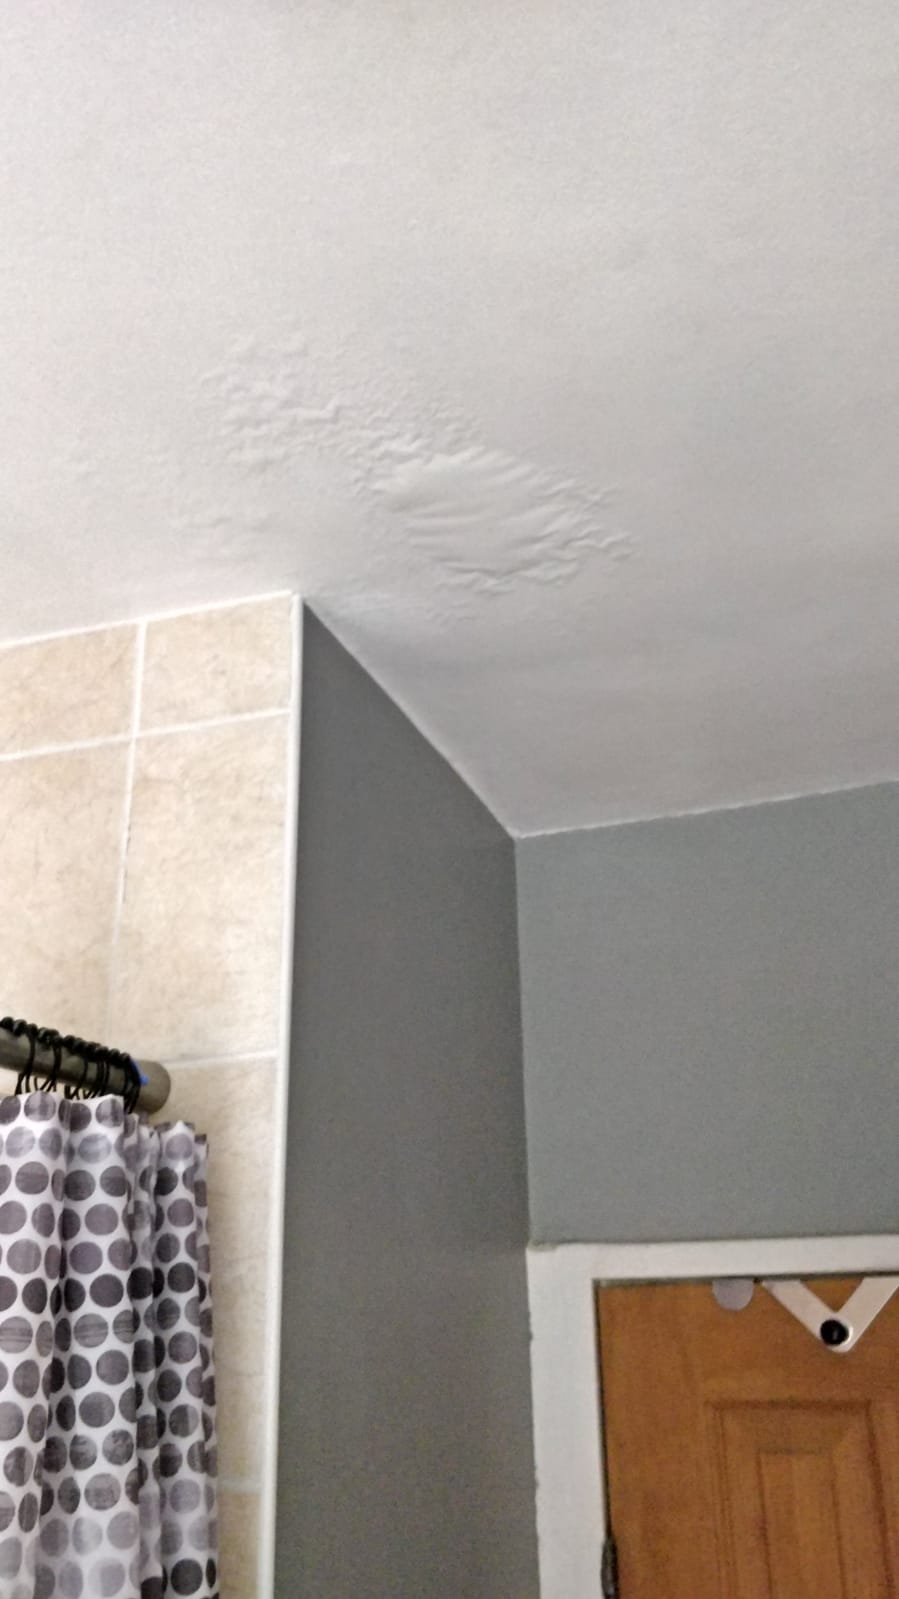 air bubbles in the bathroom ceiling | DIYnot Forums